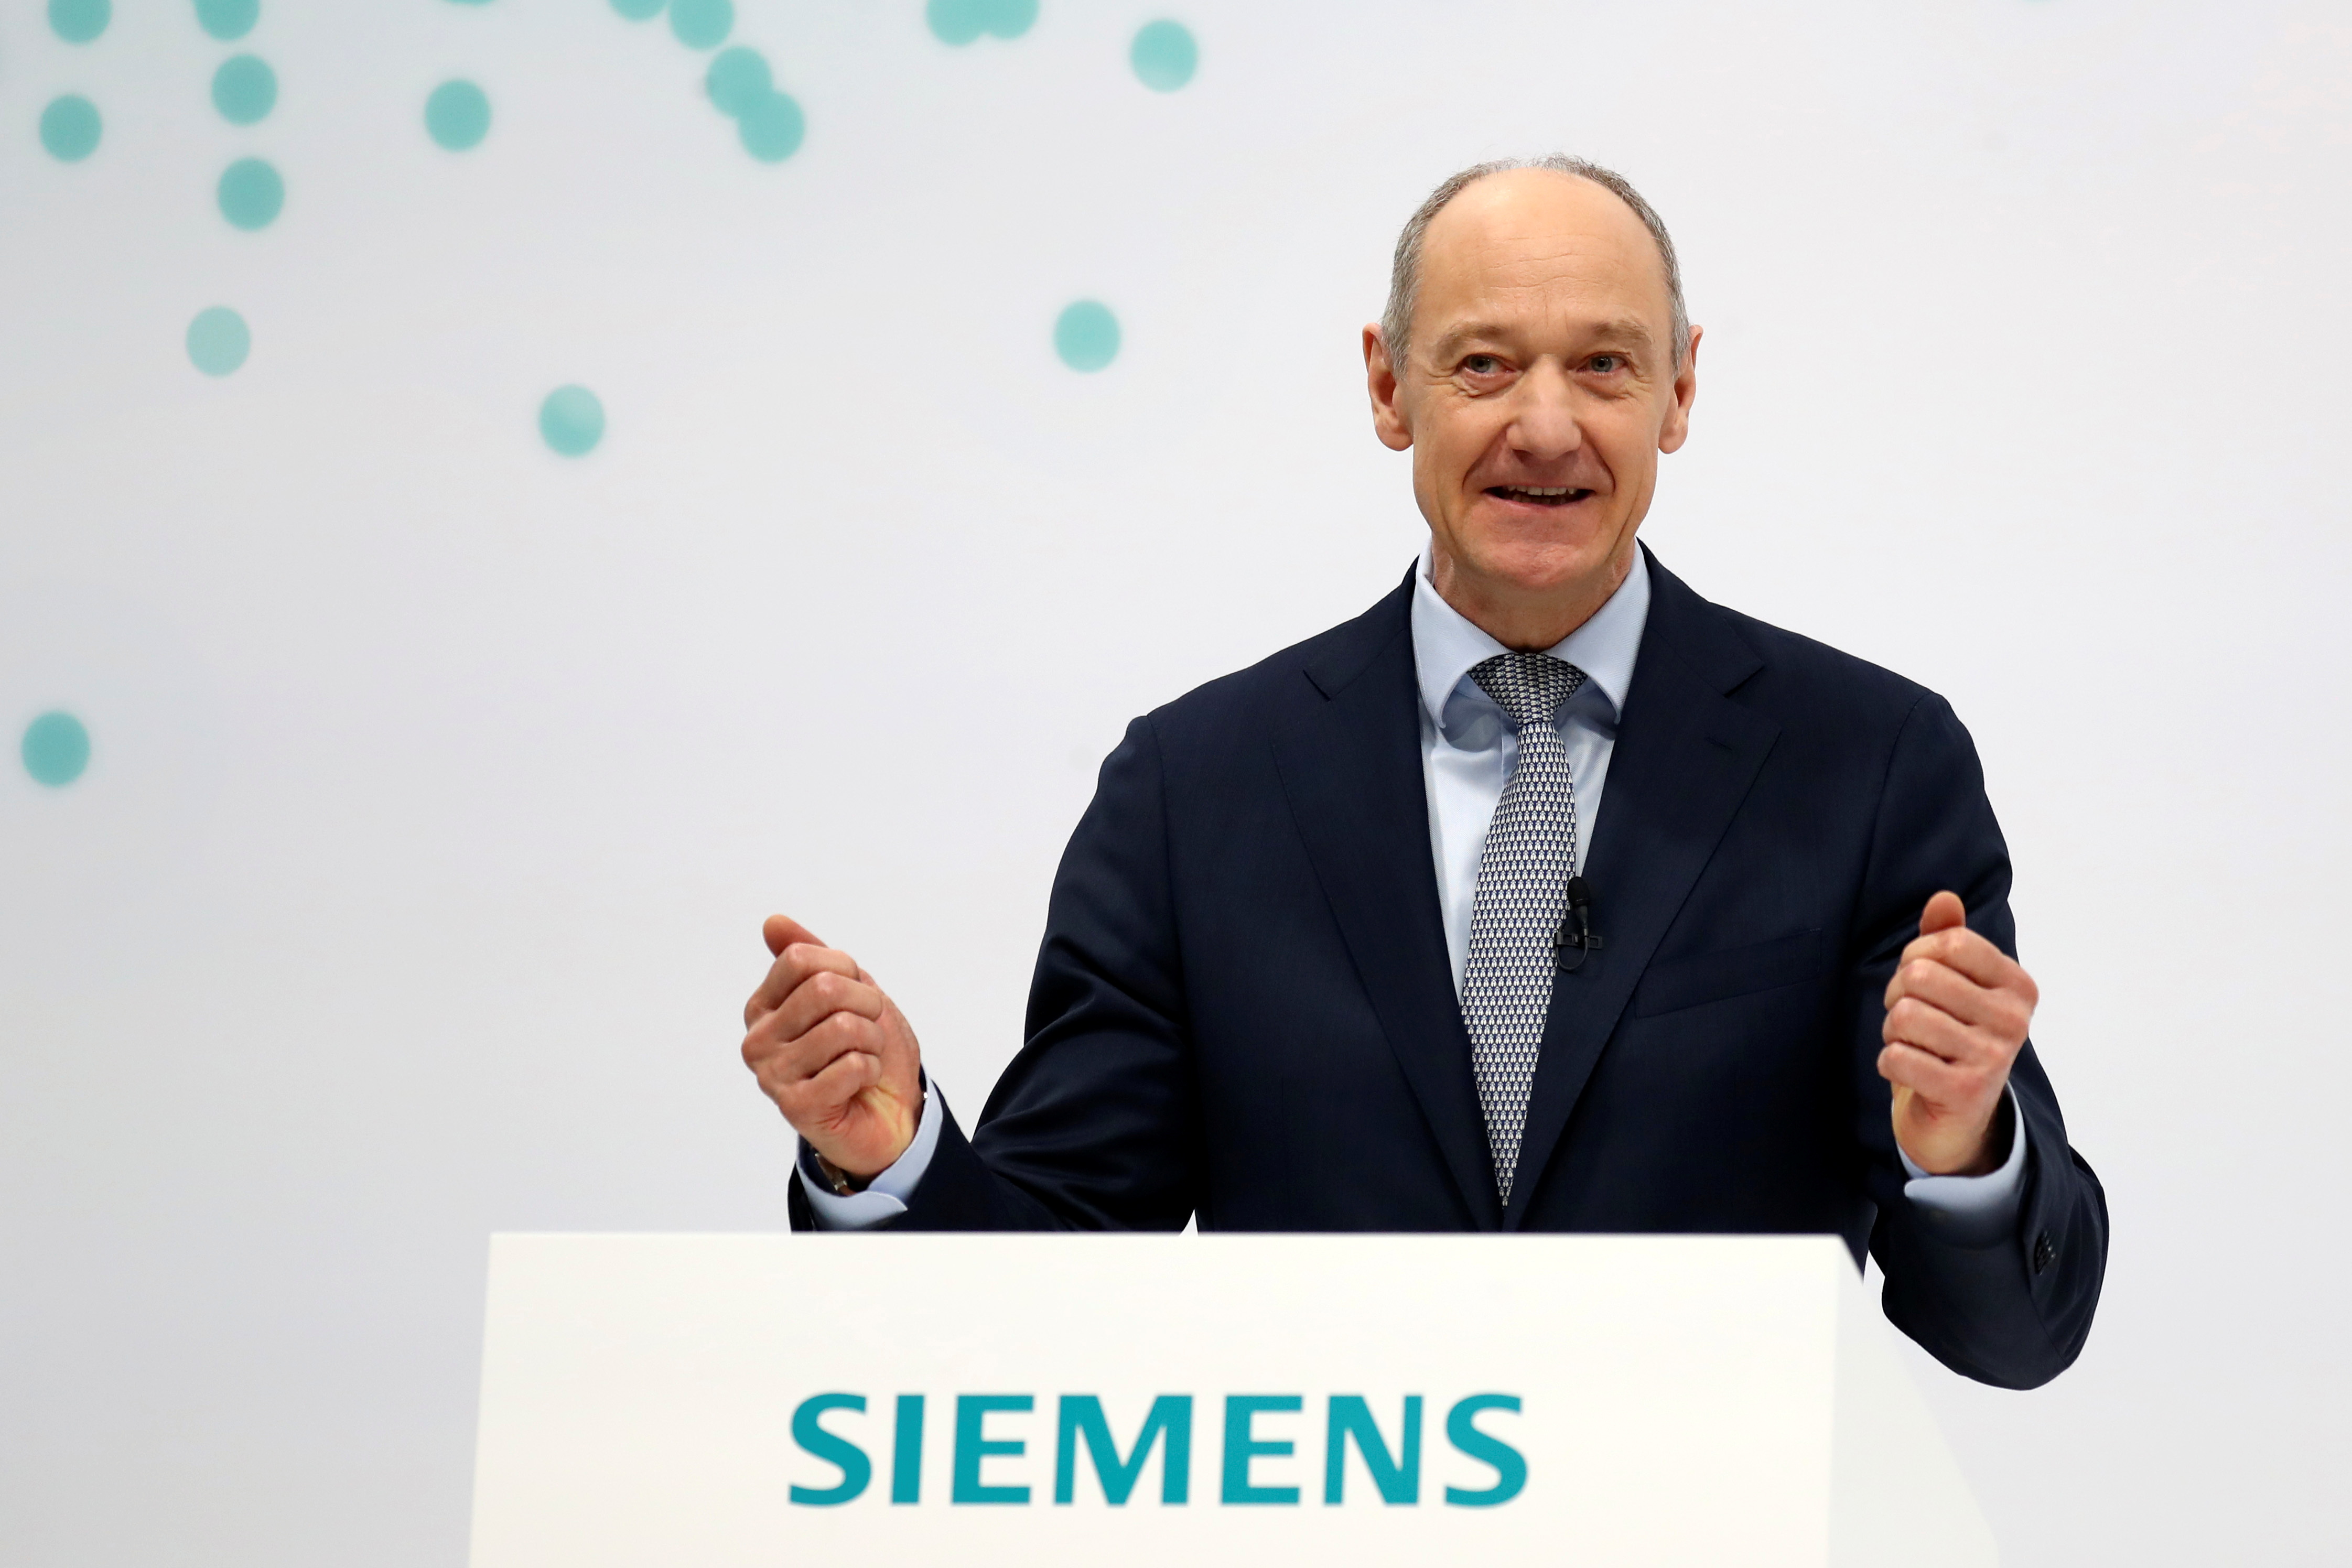 The new Siemens boss Roland Busch is now fully focused on growth